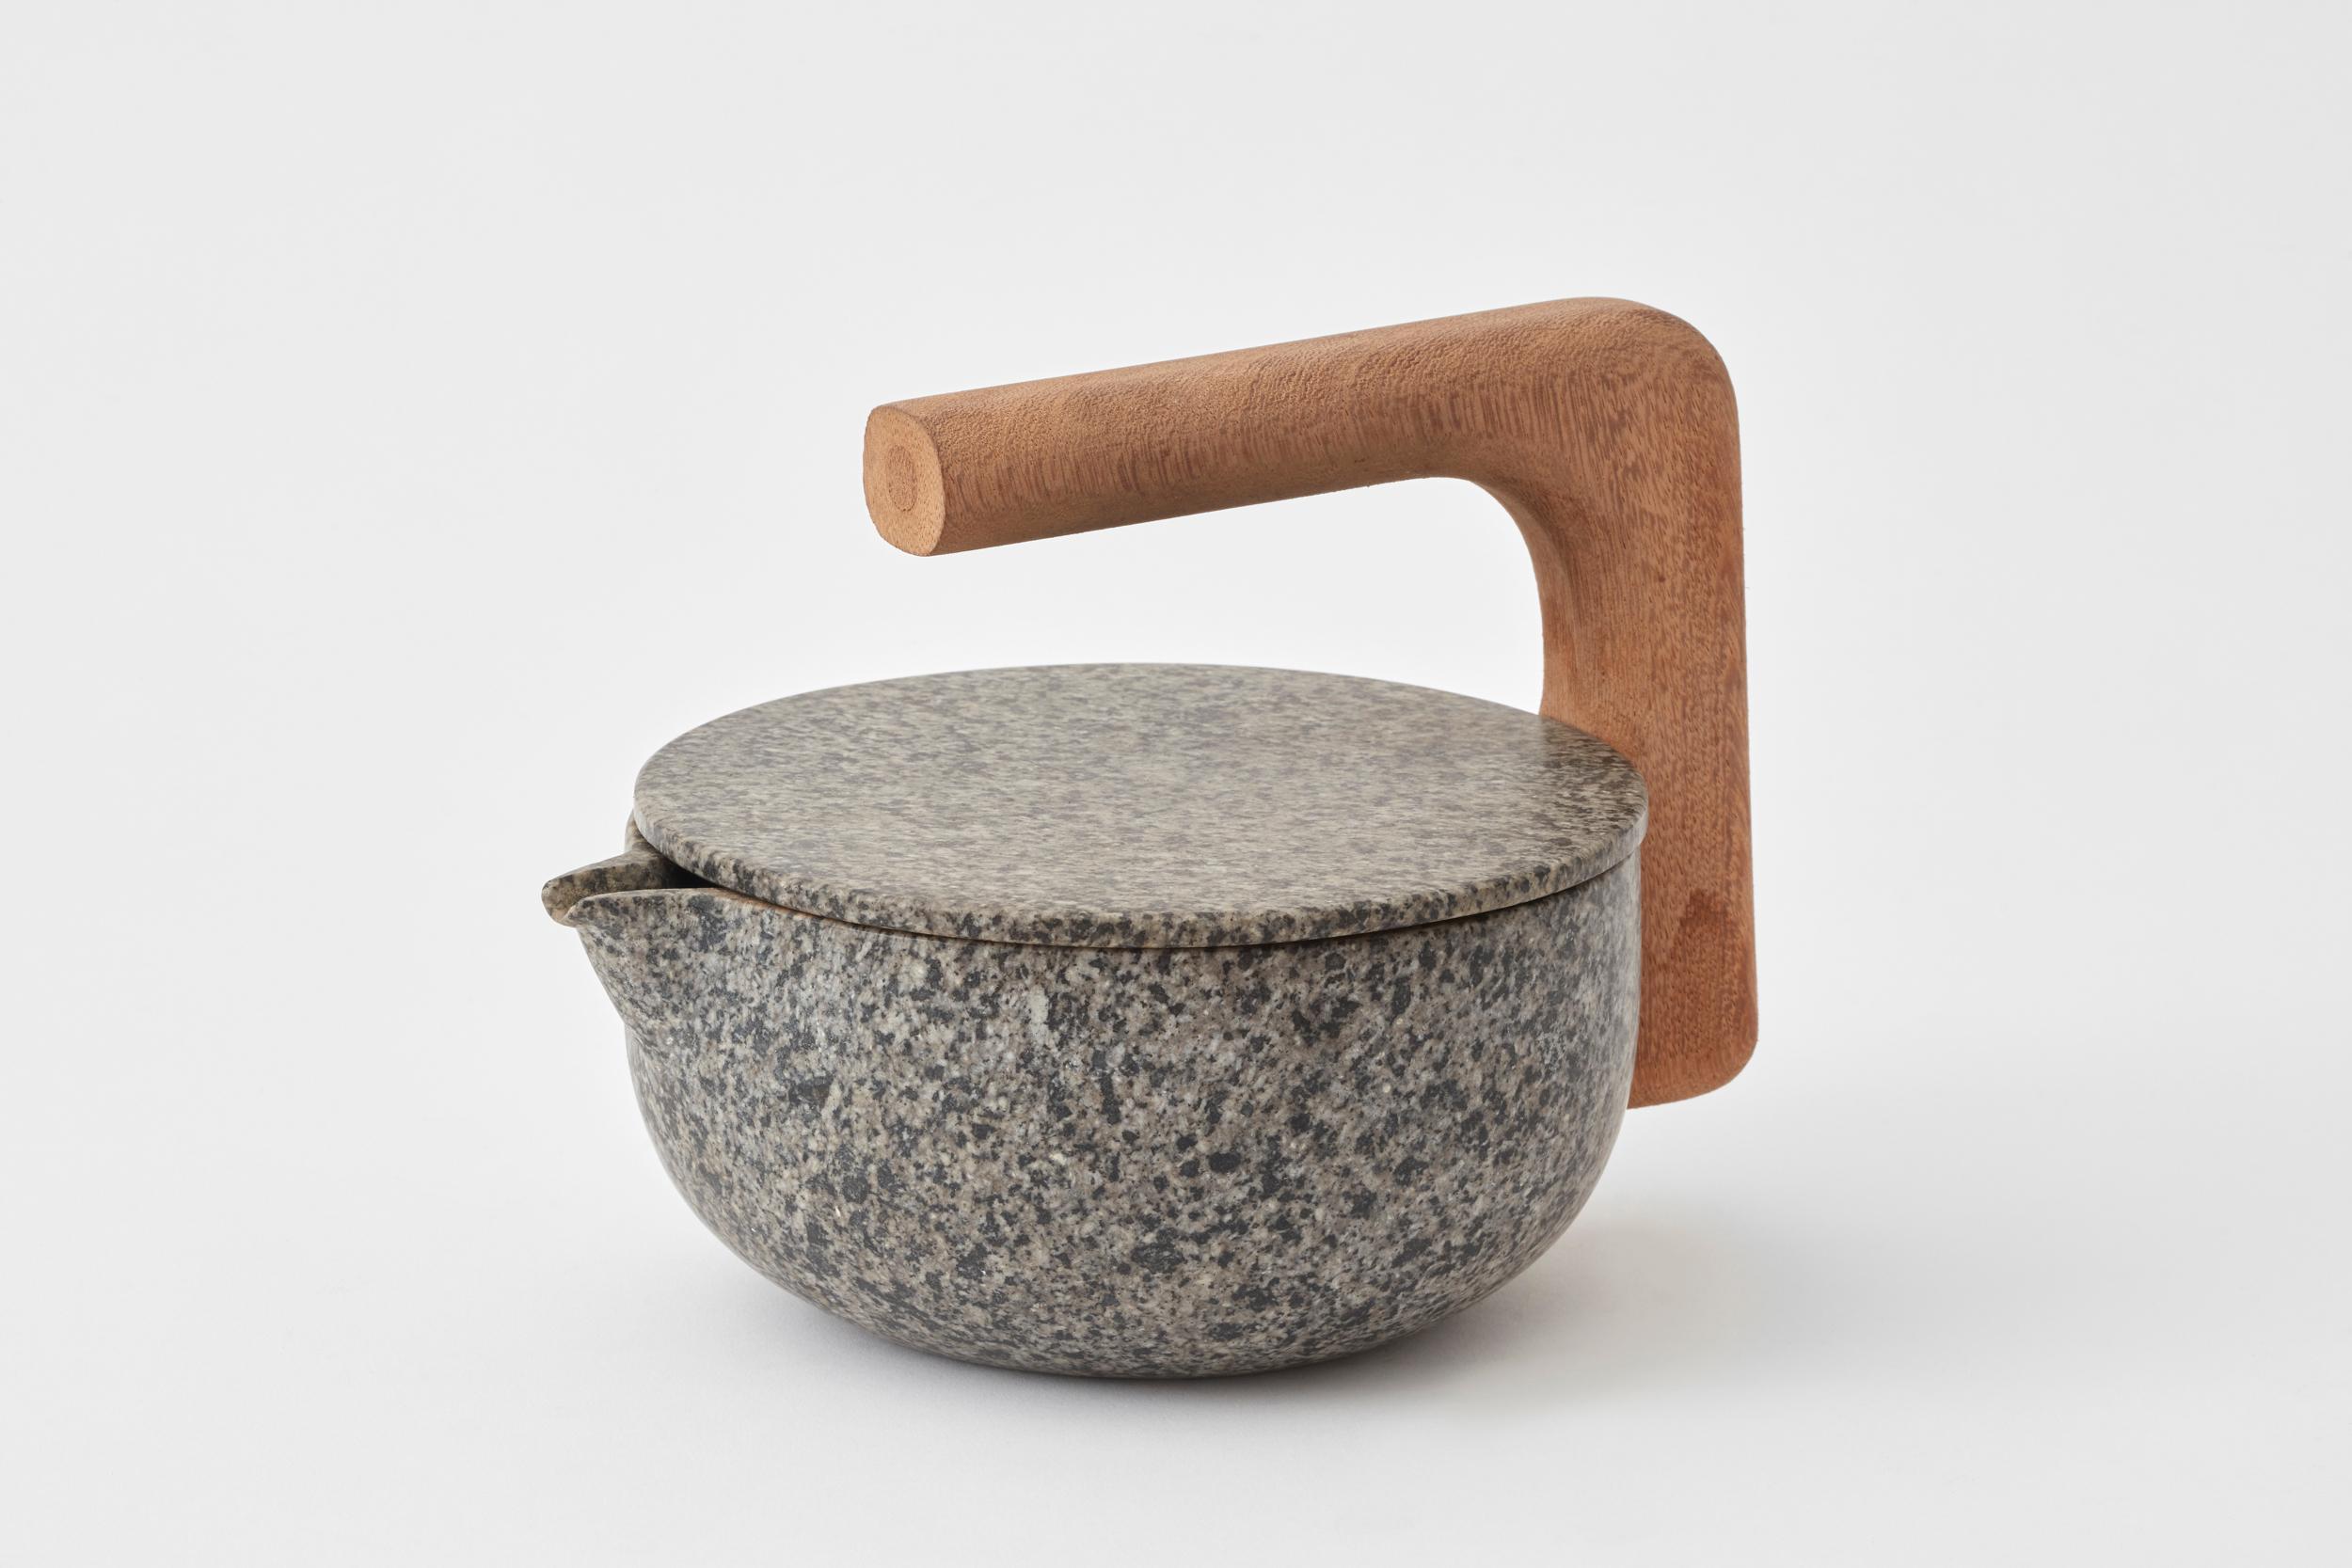 Teapot N°2 by Estudio Rafael Freyre.
Dimensions: W 27 x D 15 x H 15.5 cm.
Materials: andes granite, amazonic wood.

Tea pot is an everyday object that explores the ritual relationship of water and plant use. Hot water, in contact with plant